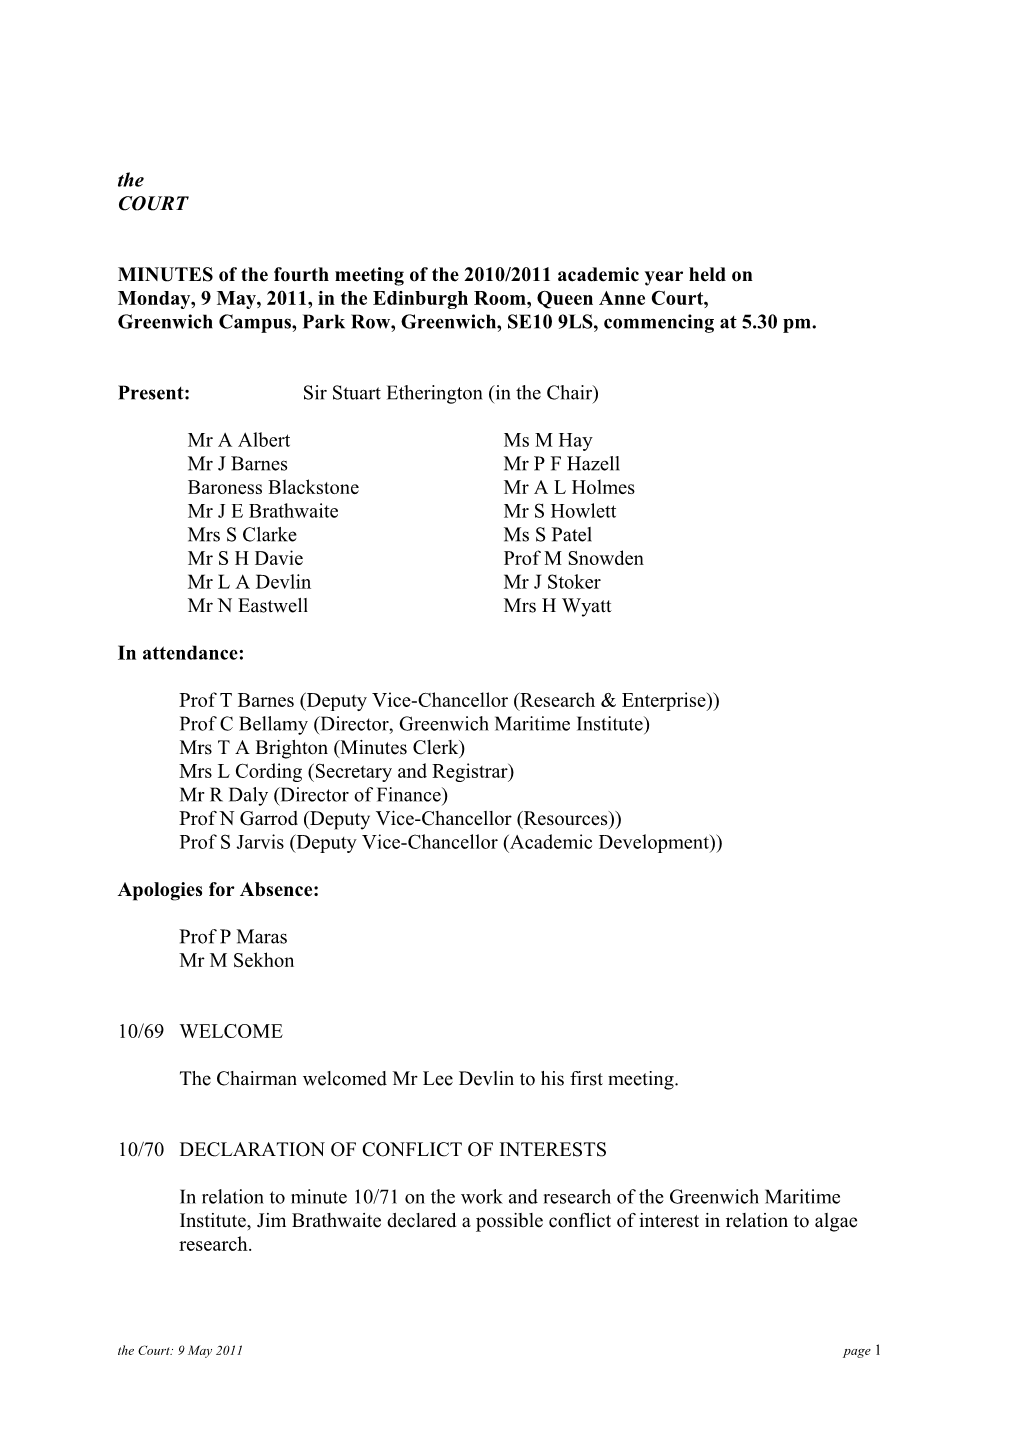 MINUTES of the Fourth Meeting of the 2010/2011 Academic Year Held On